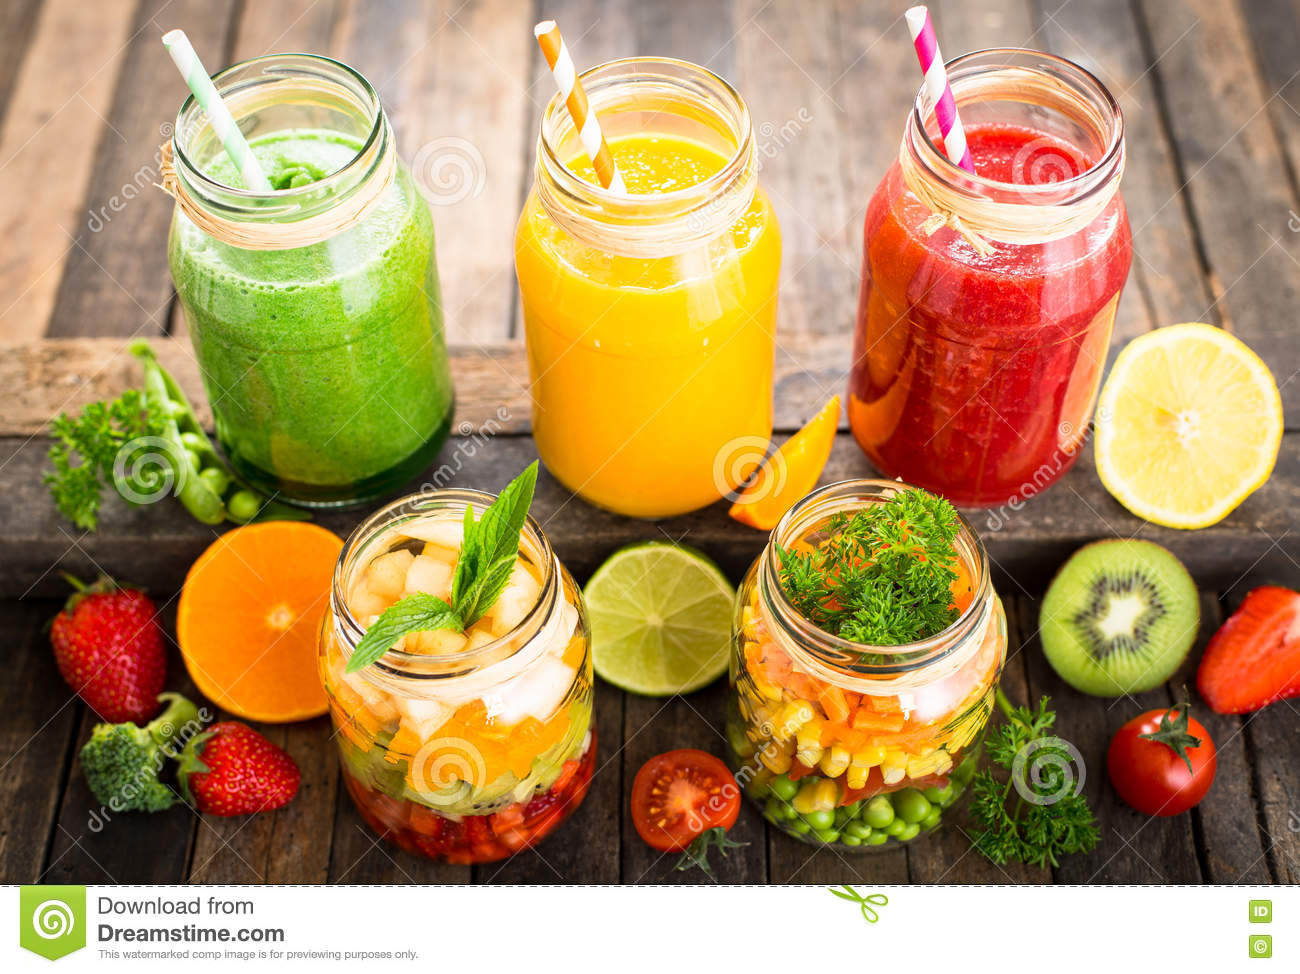 Healthy Fruit And Veggie Smoothies
 Healthy Fruit And Ve able Smoothies Royalty Free Stock